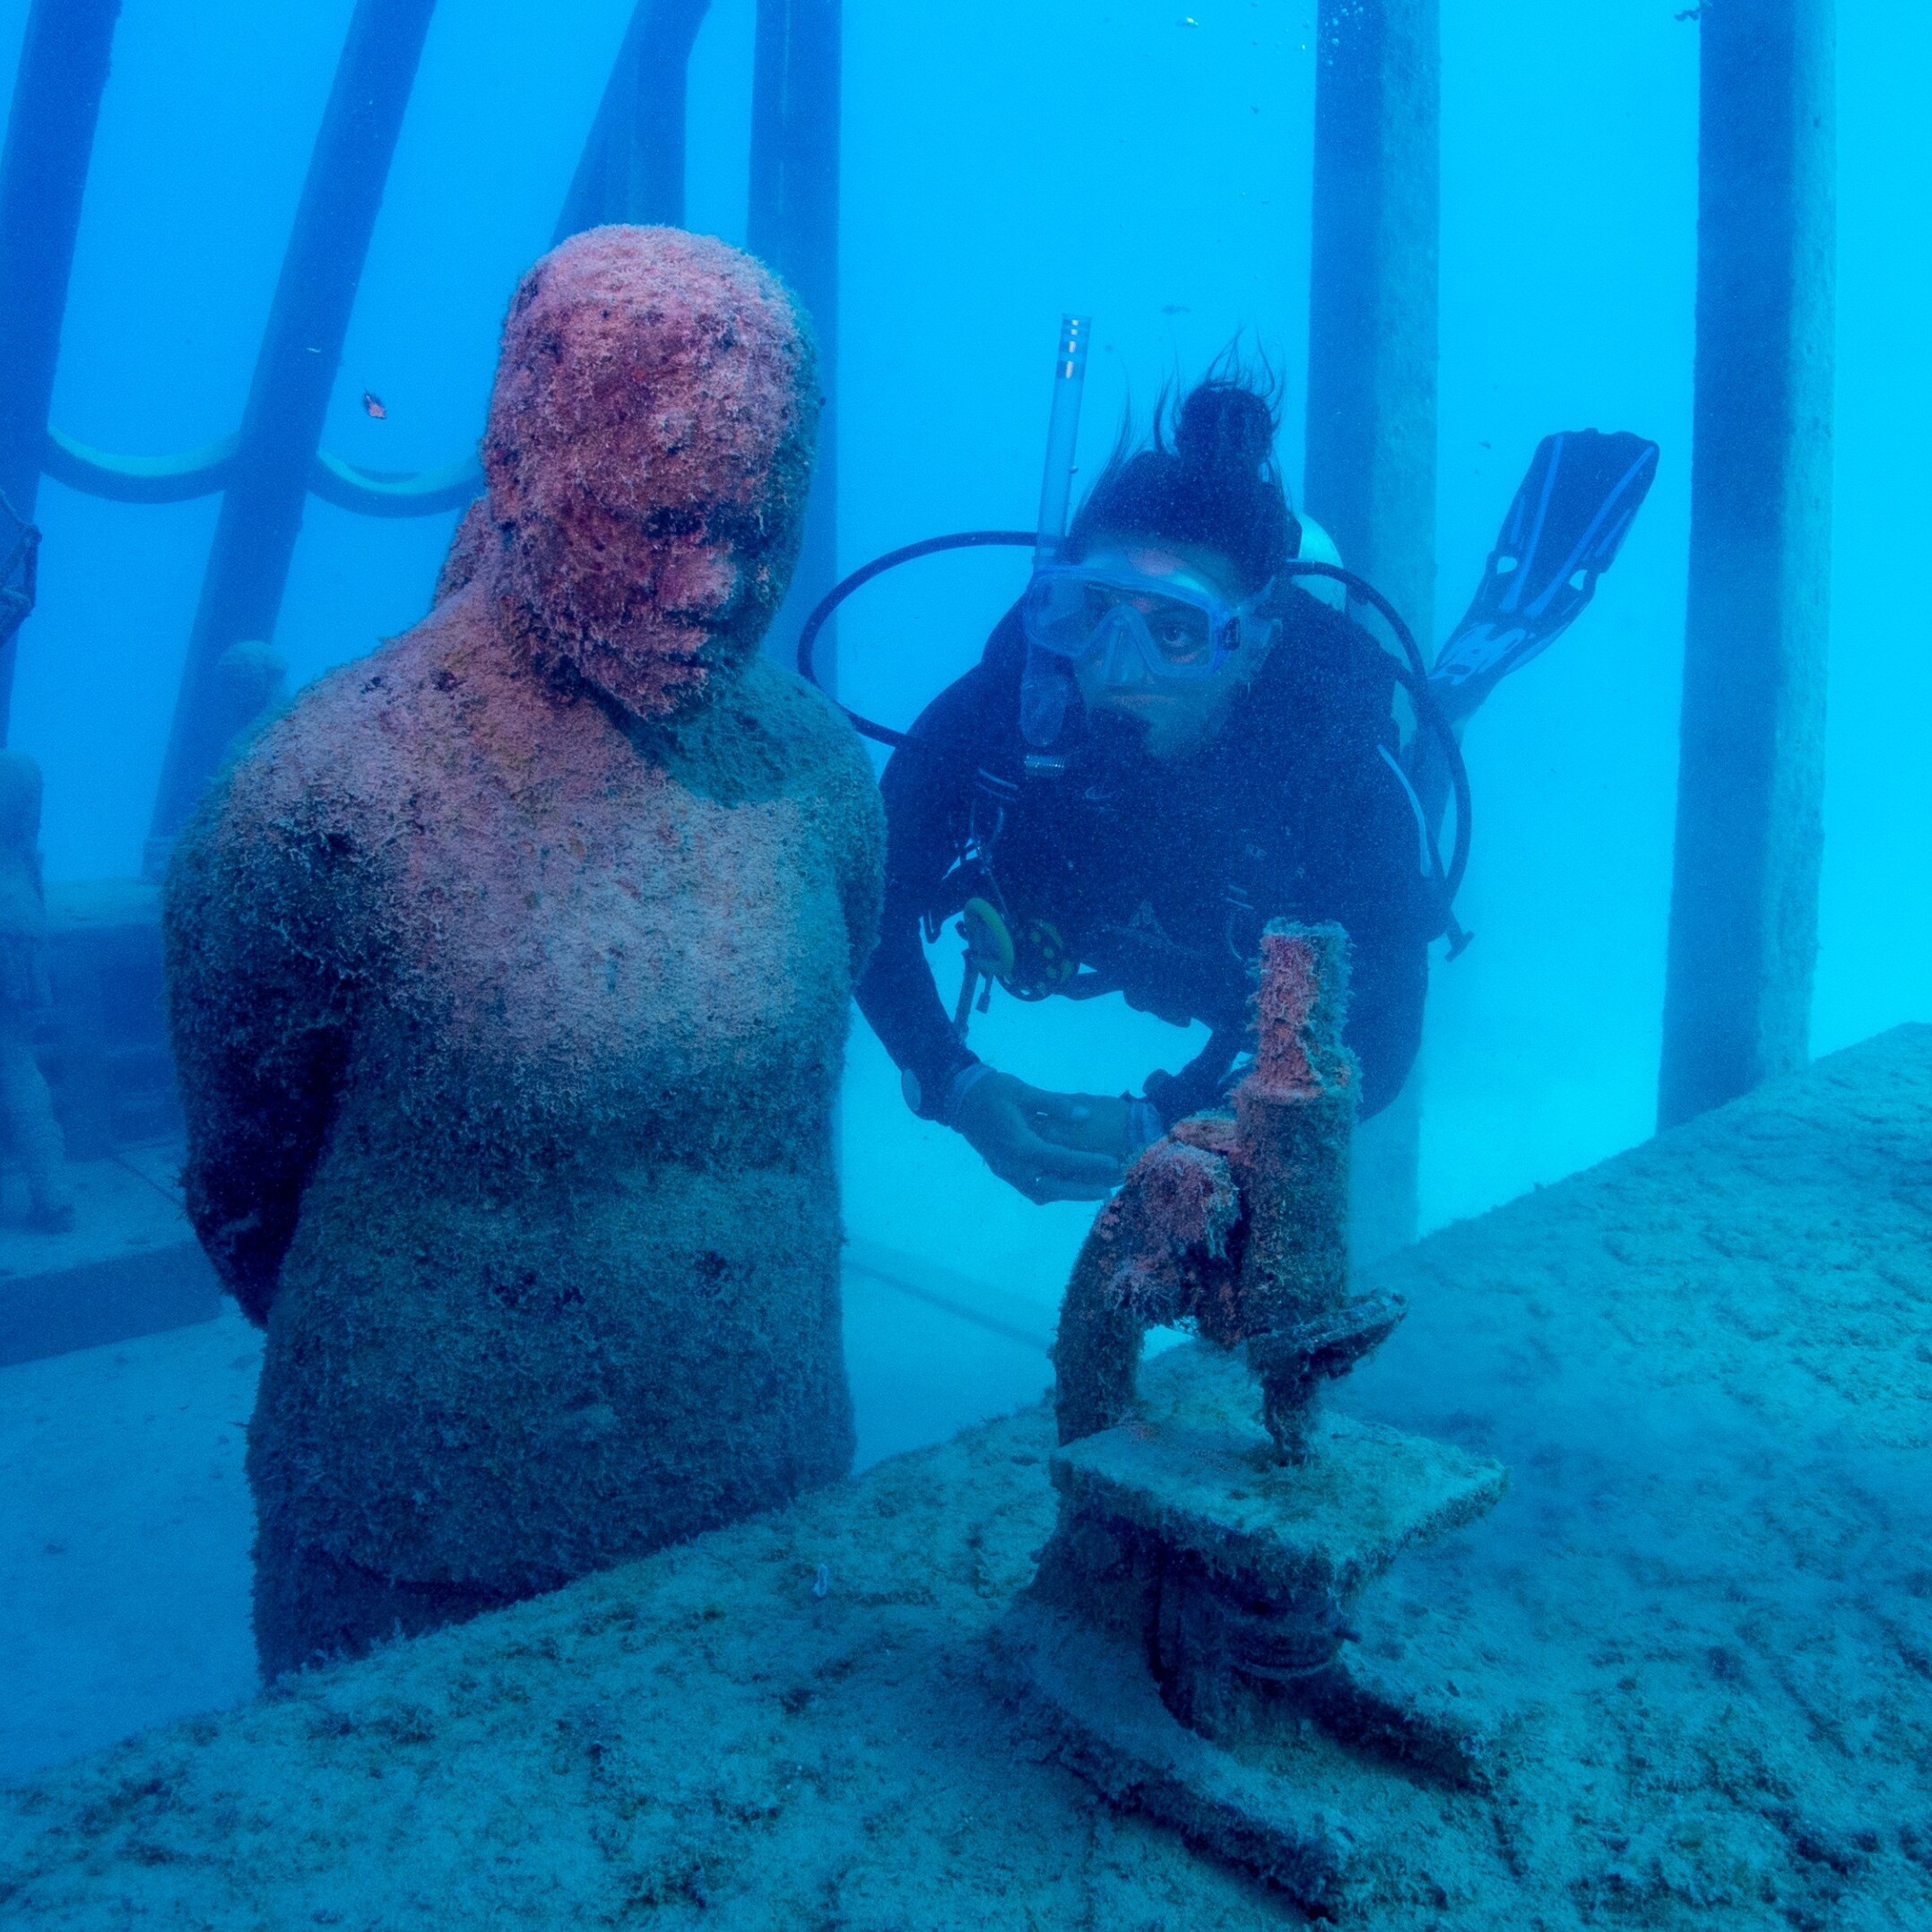 Scuba diver swims next to a statue inside the Coral Greenhouse at the Museum of Underwater Art © Gemma Molinaro Photographer